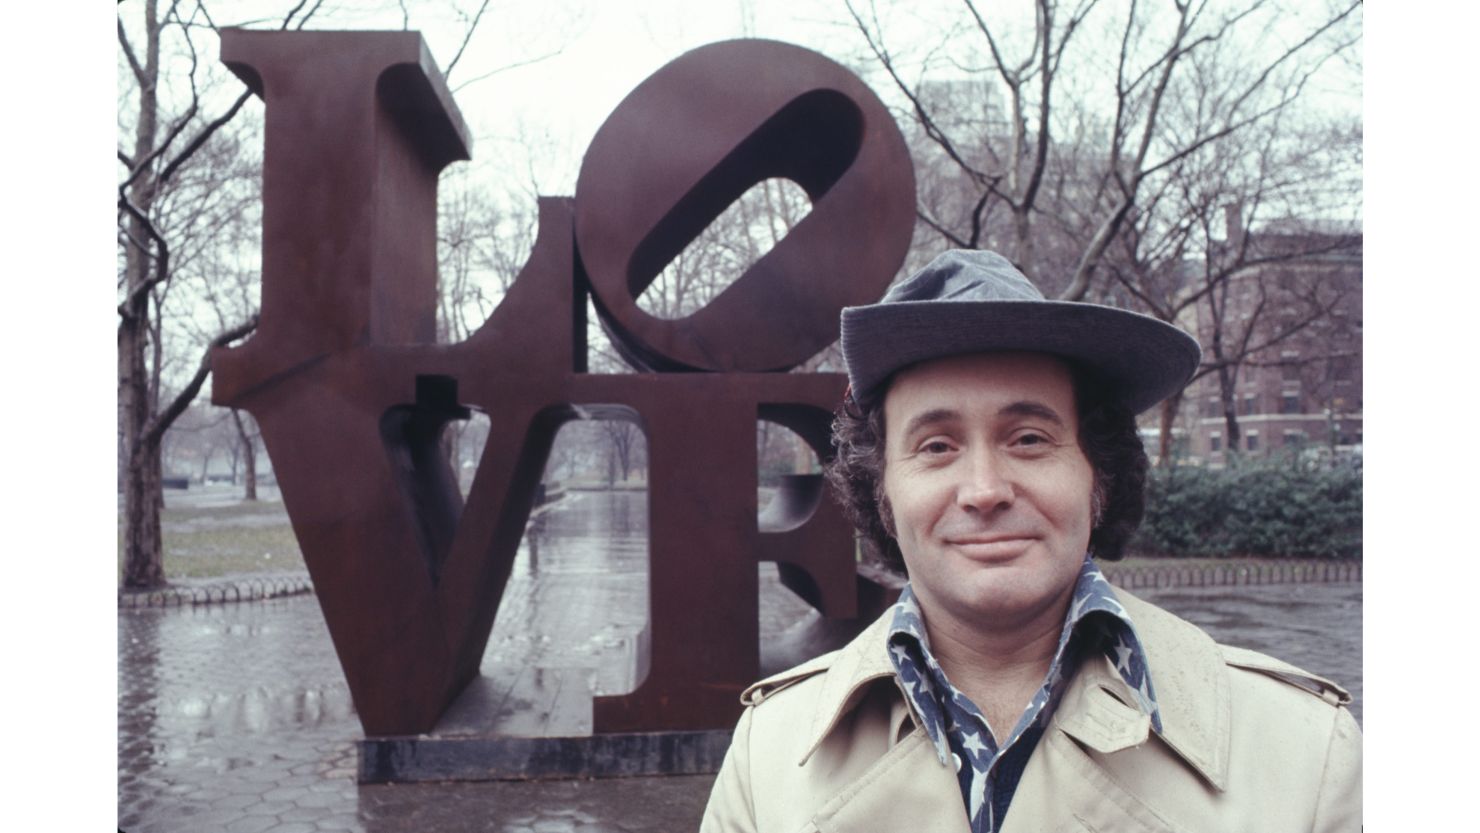 Robert Indiana with his 'LOVE' sculpture in Central Park, New York City in 1971